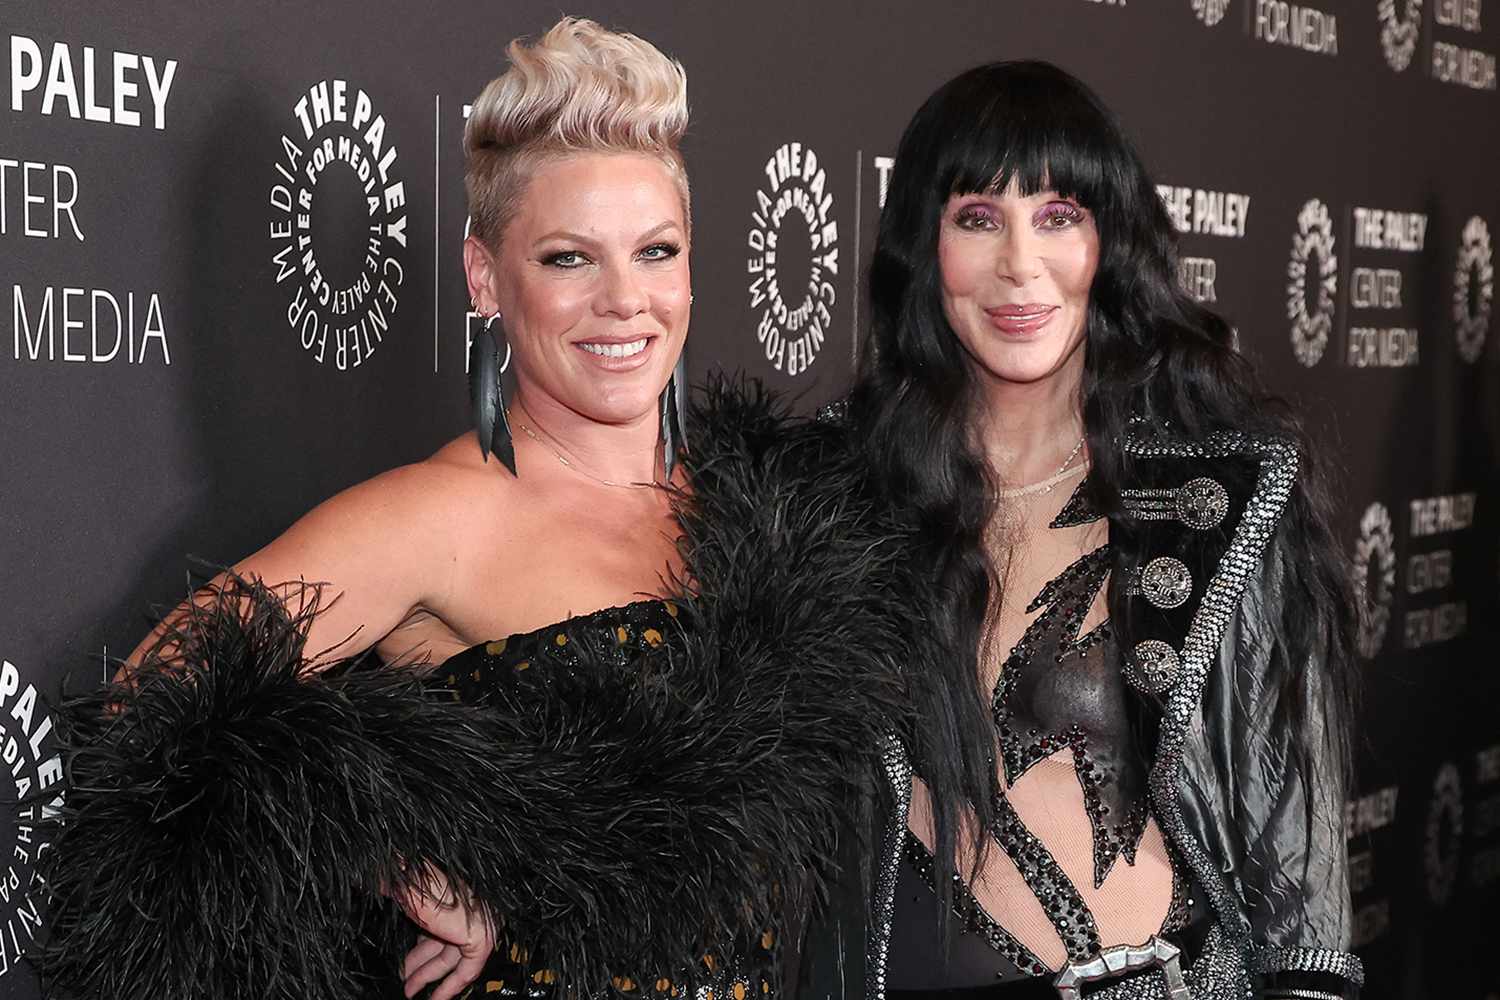 Pink and Cher Step Out in L.A., Plus Meryl Streep in Cannes, Jennifer Coolidge, Reba McEntire and More